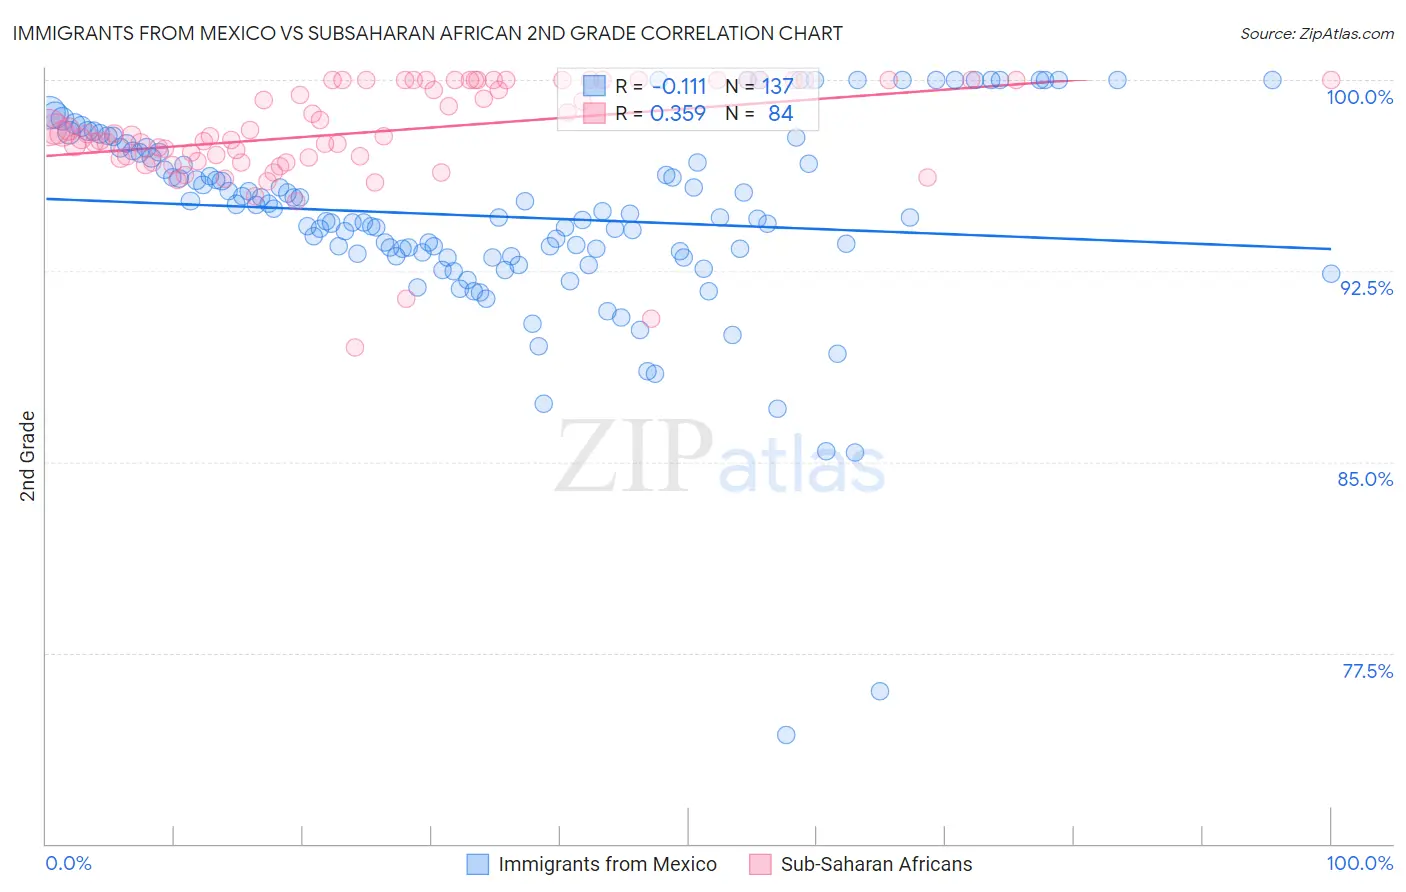 Immigrants from Mexico vs Subsaharan African 2nd Grade